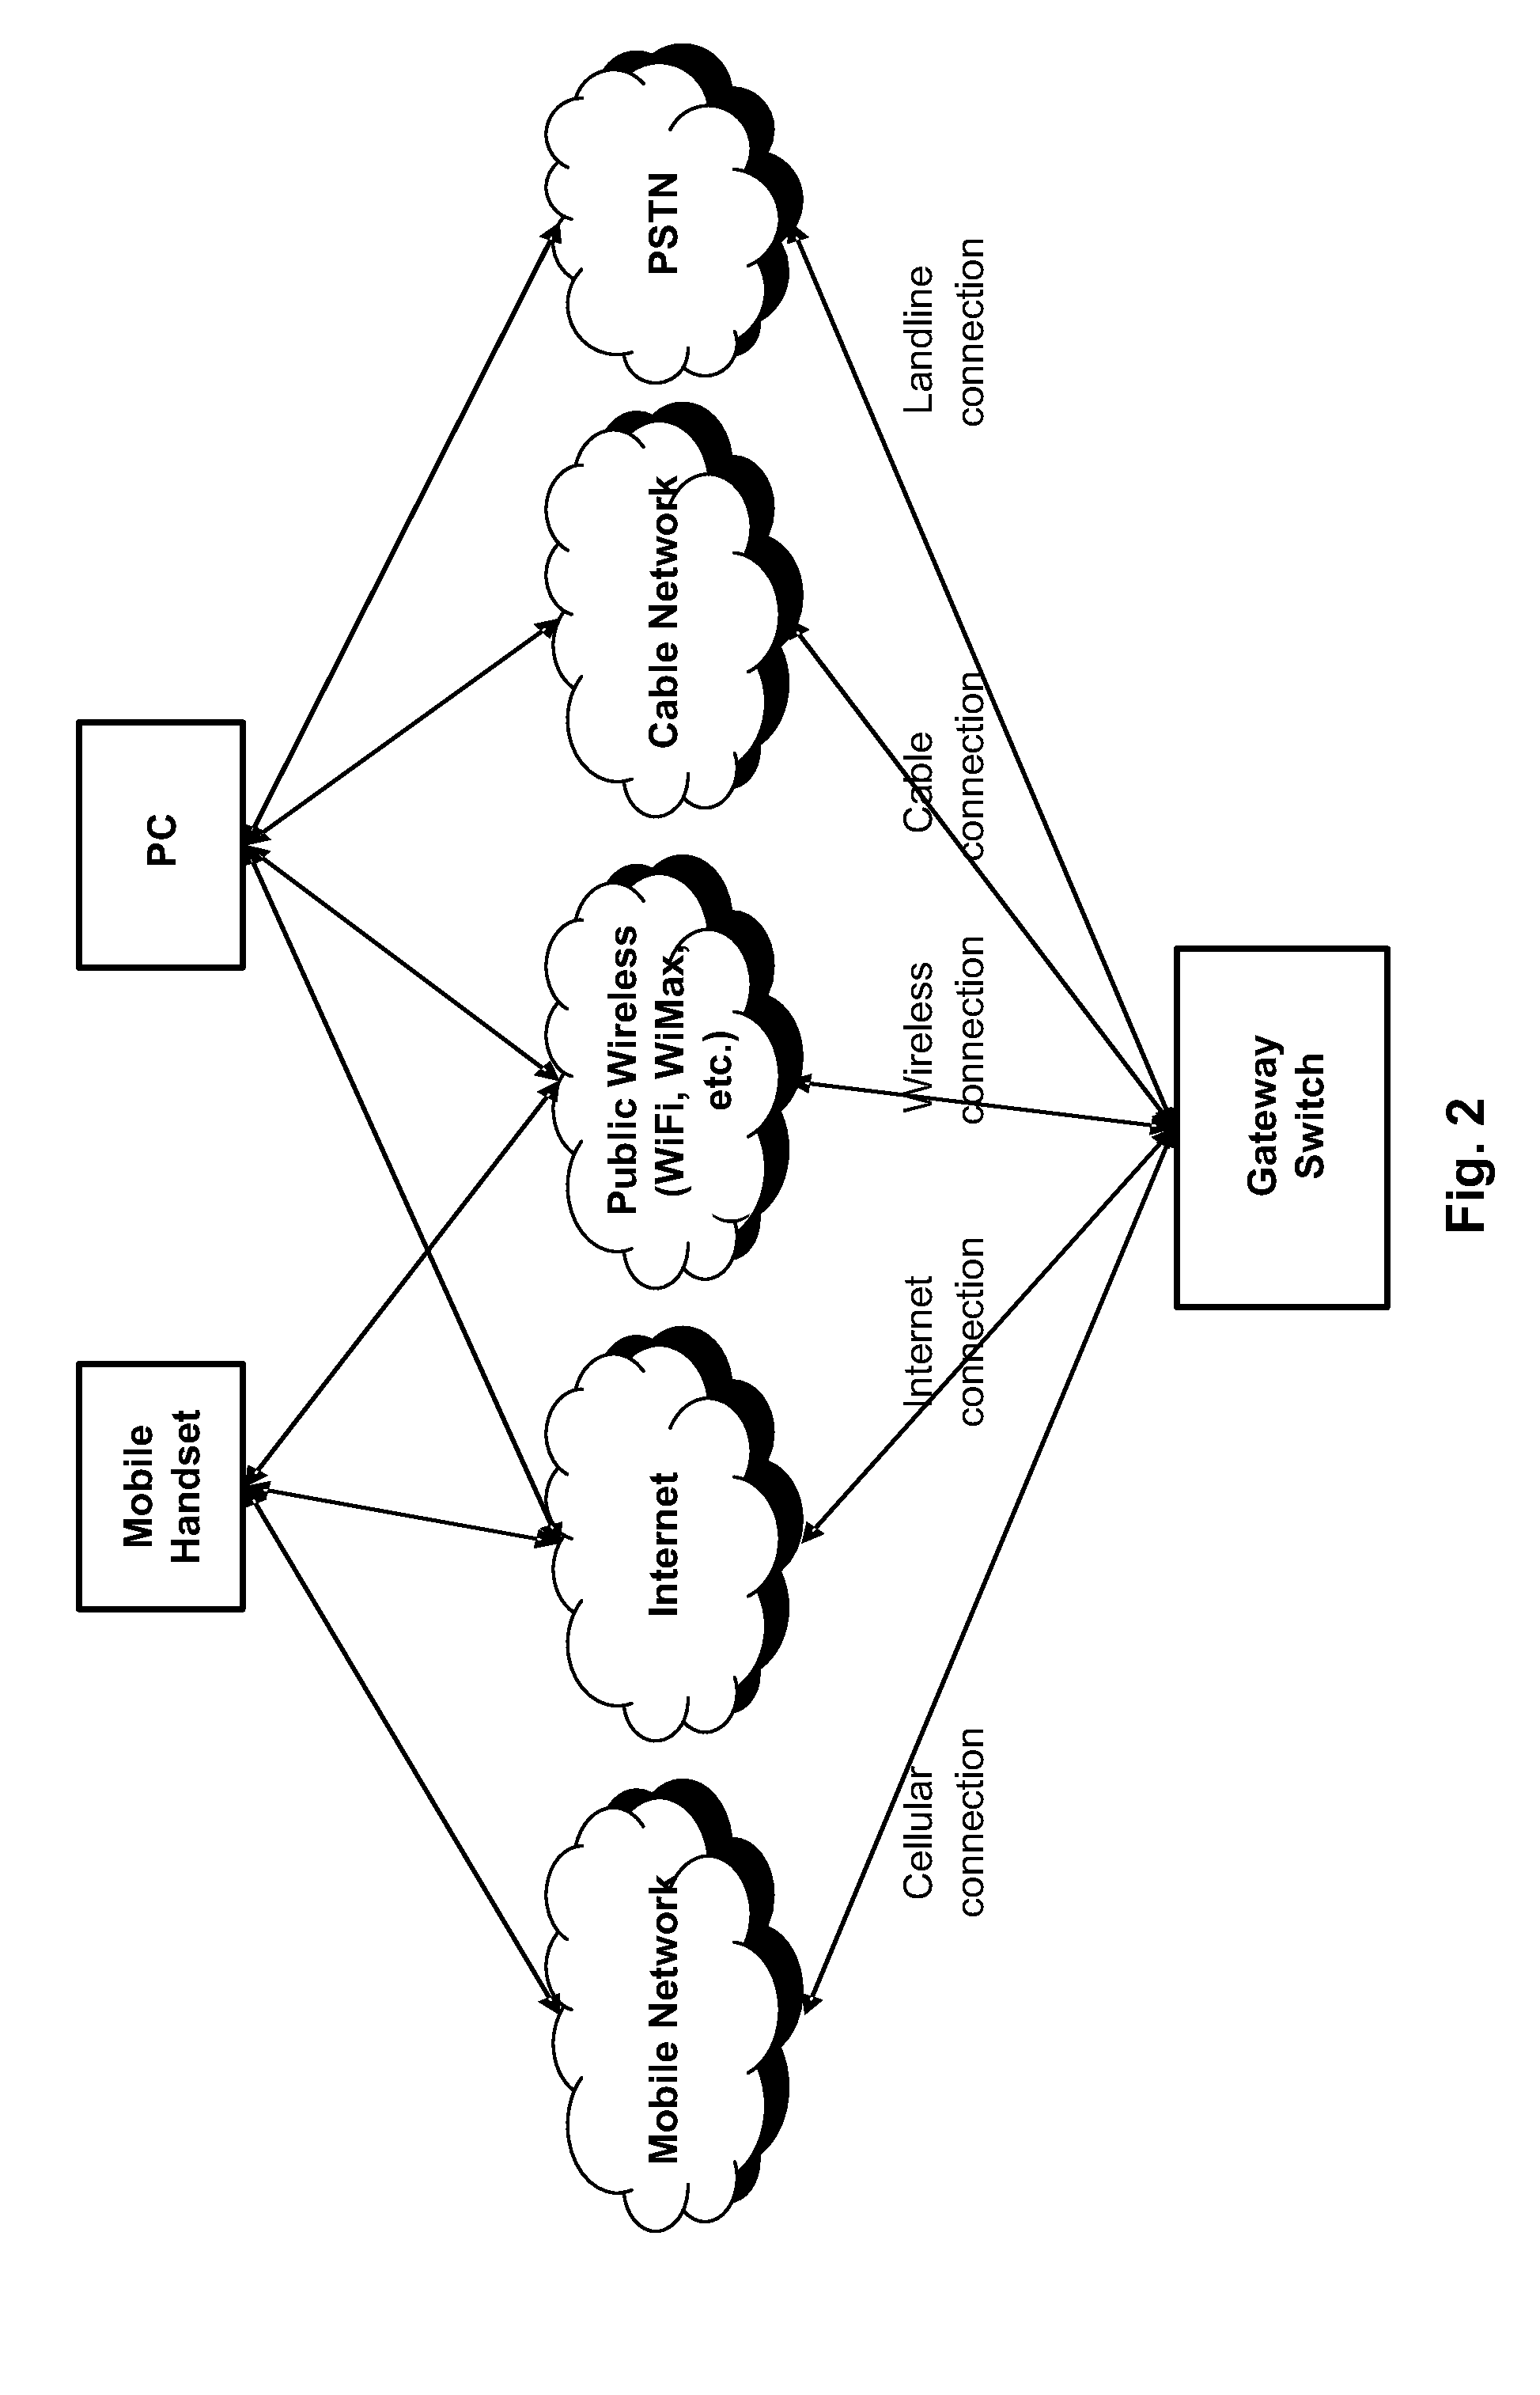 Apparatuses for Hybrid Wired and Wireless Universal Access Networks